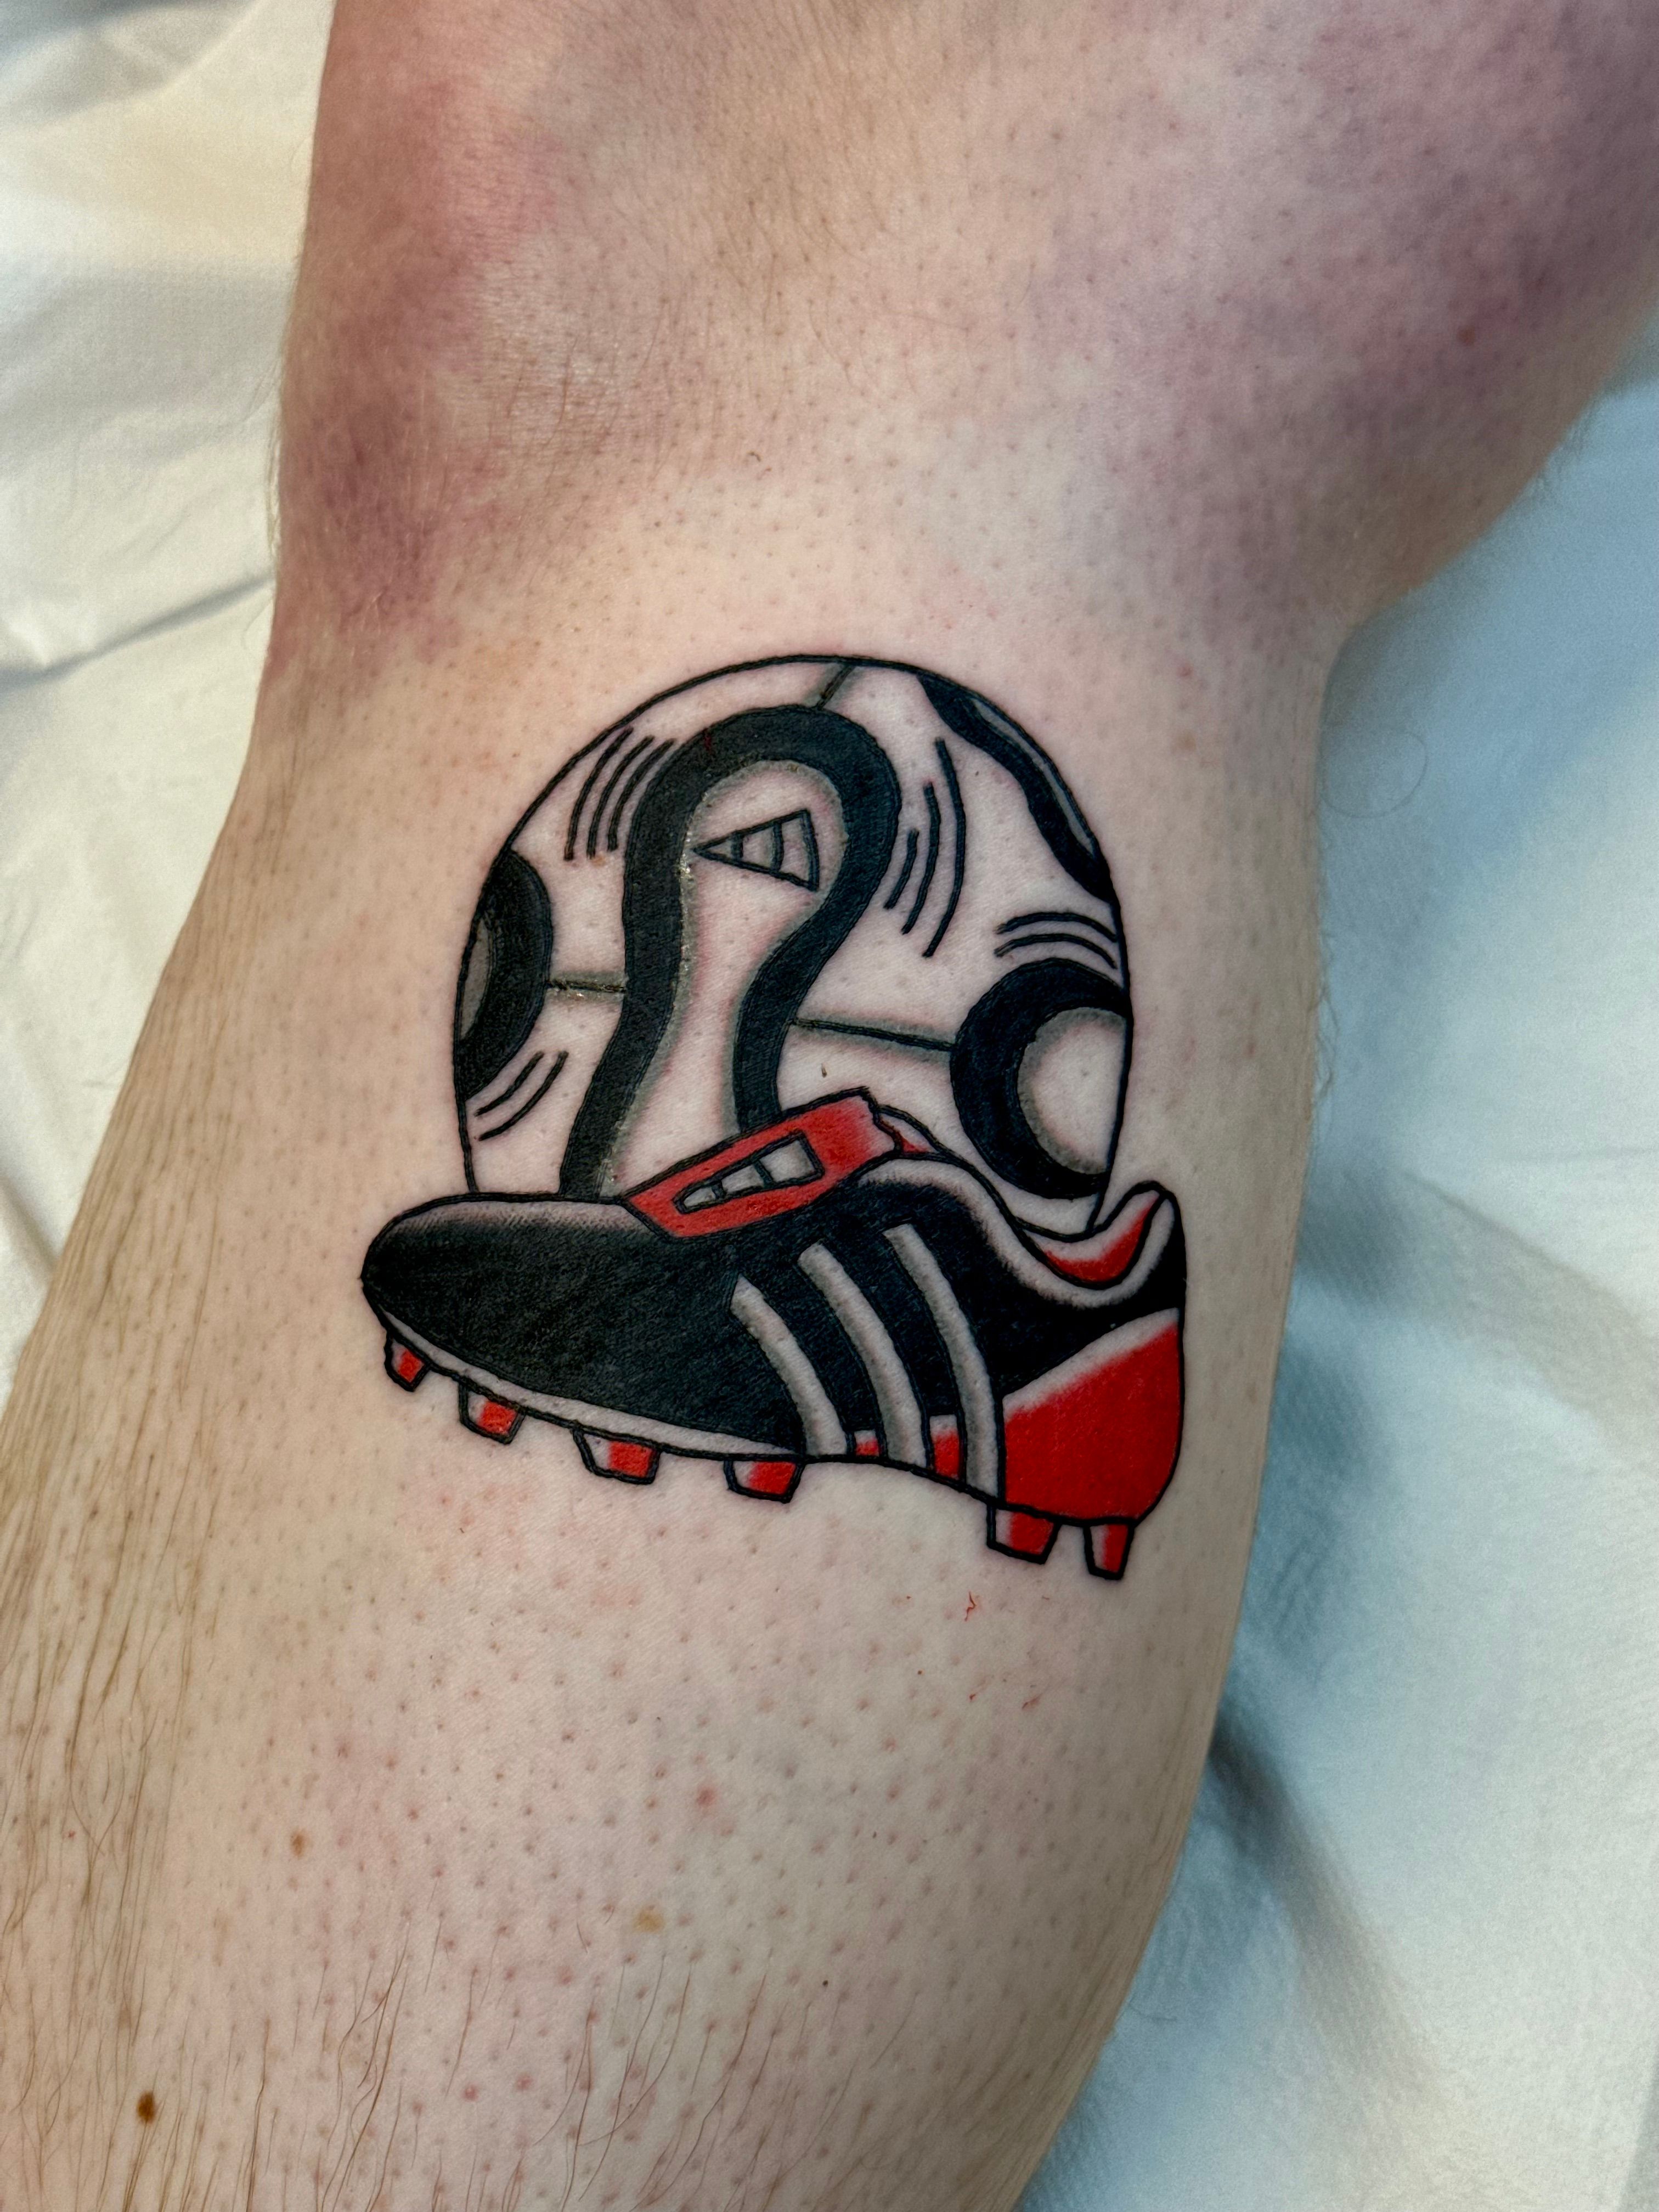 Football tattoos ranked from best to worst